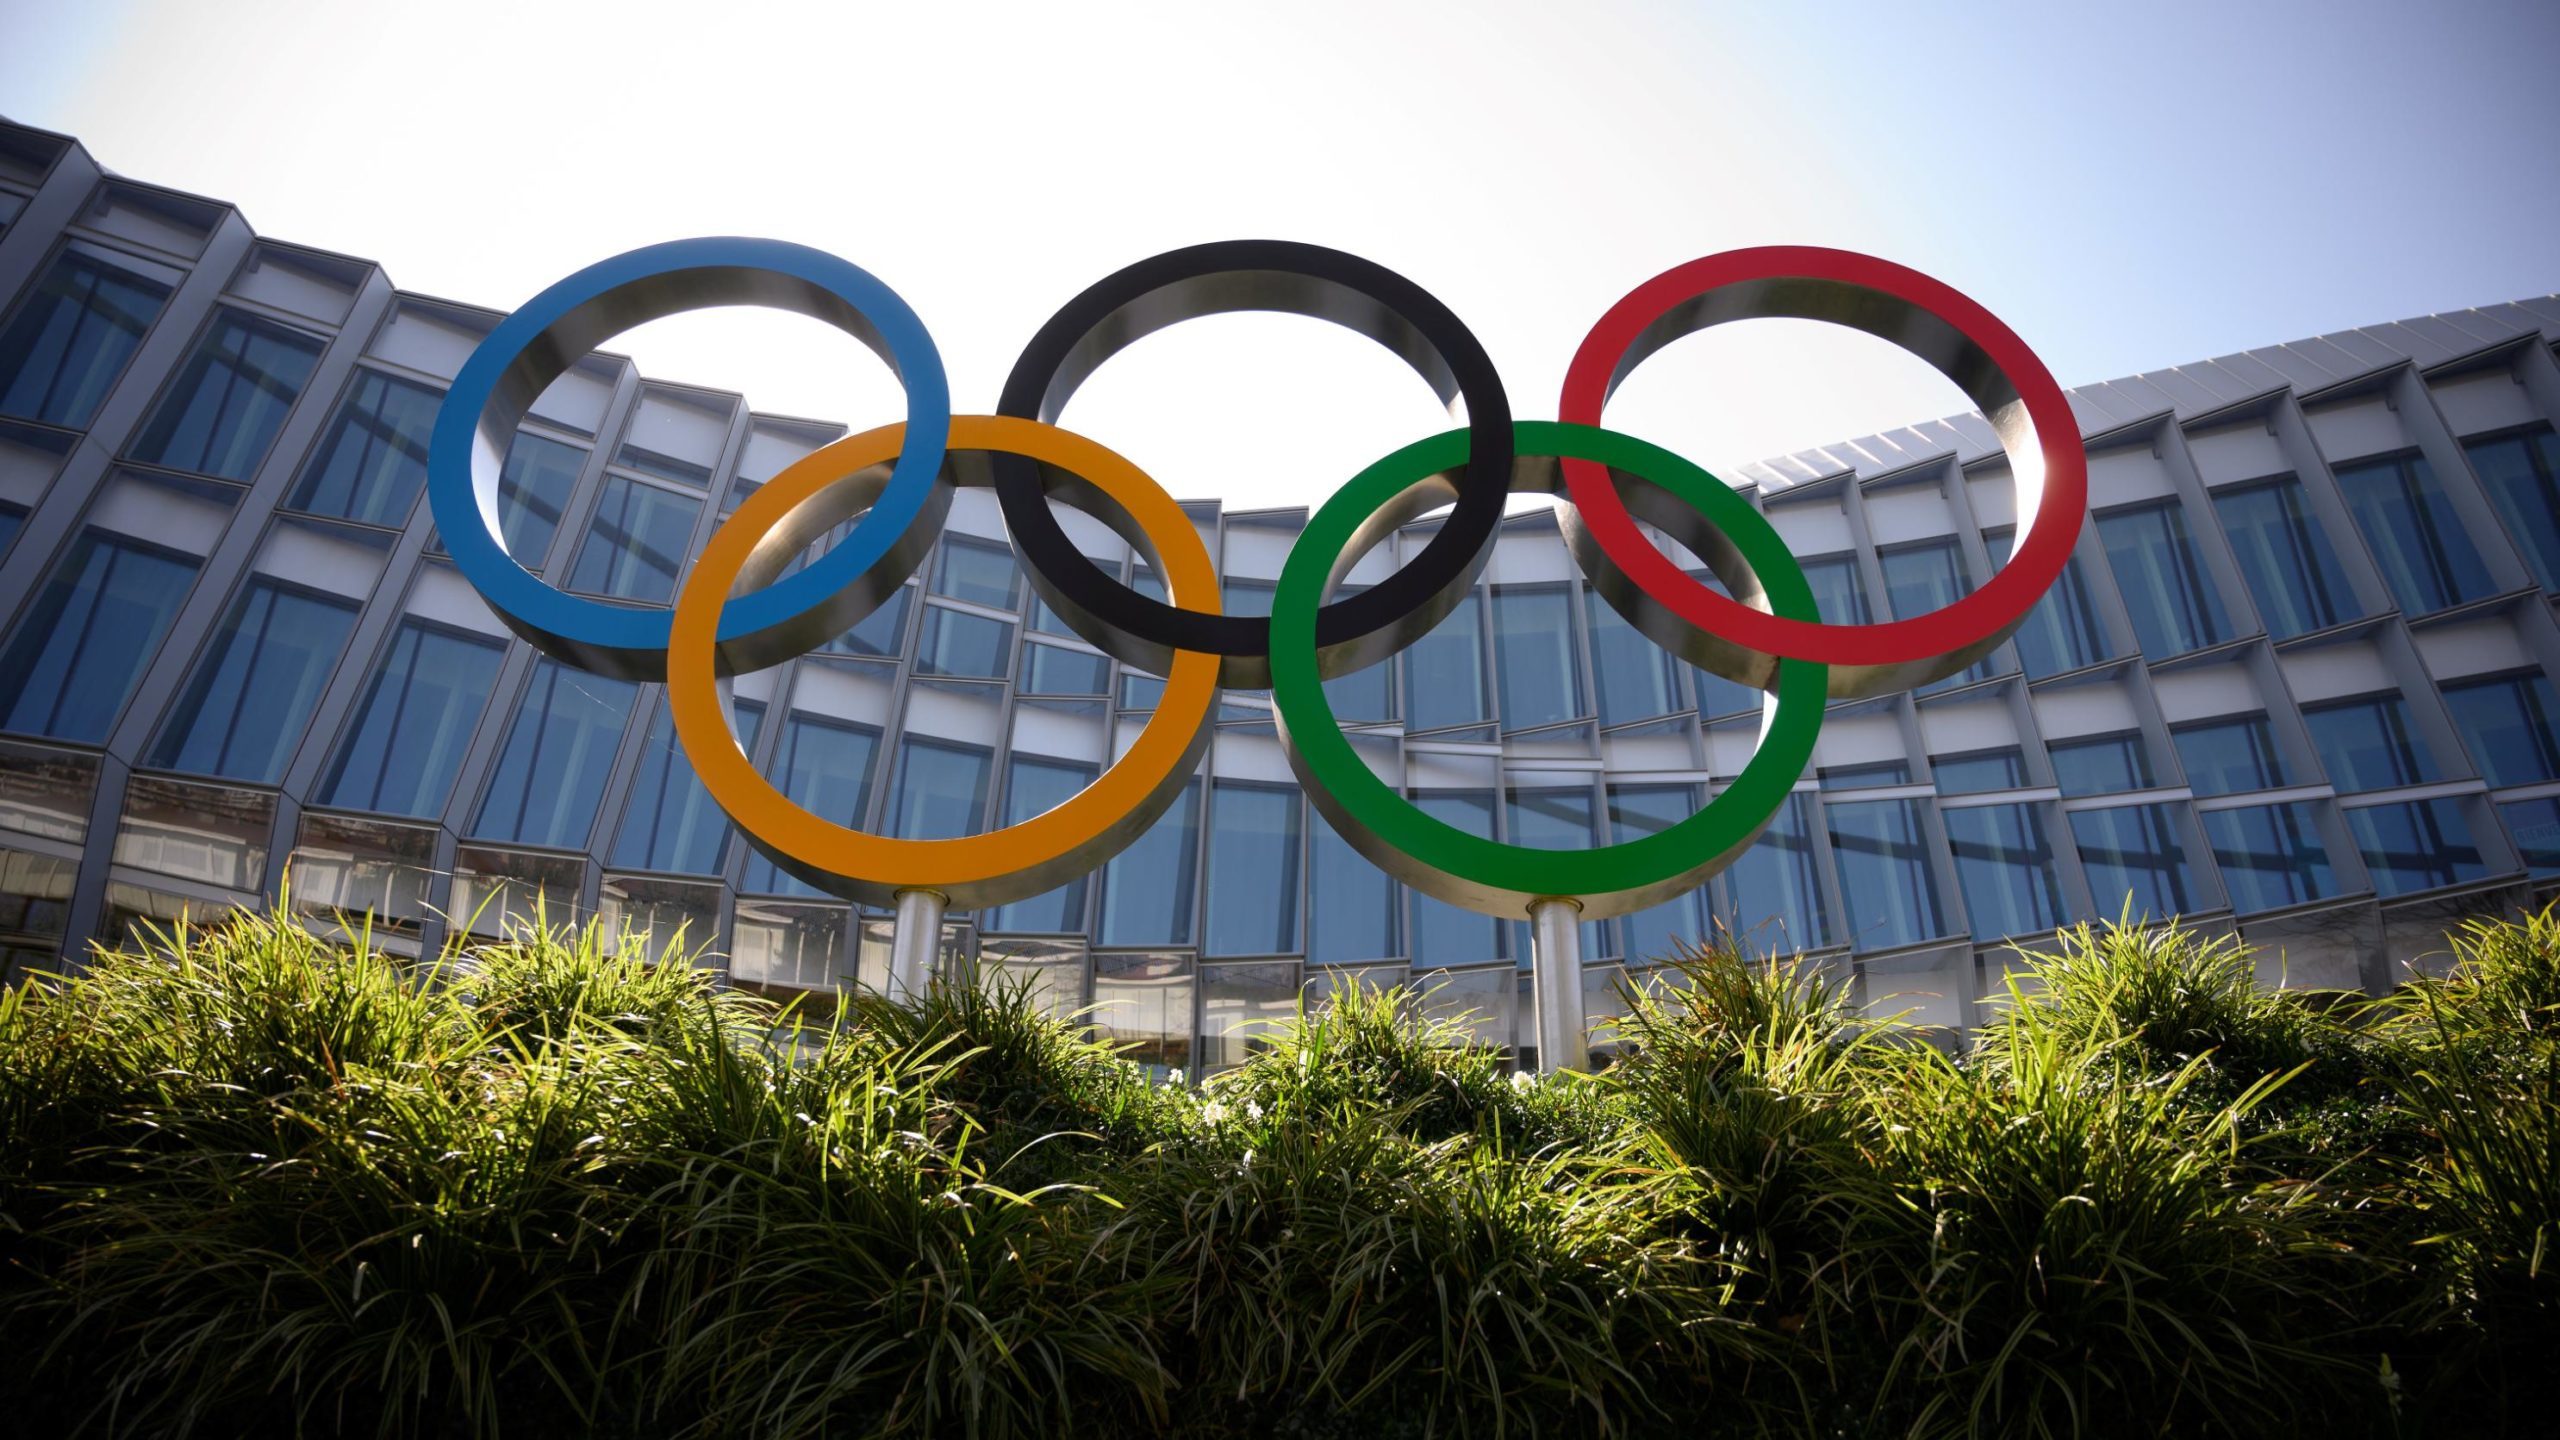 Utah lawmakers are seeking to have more oversight into Utah's Olympic bid. It all centers around li...